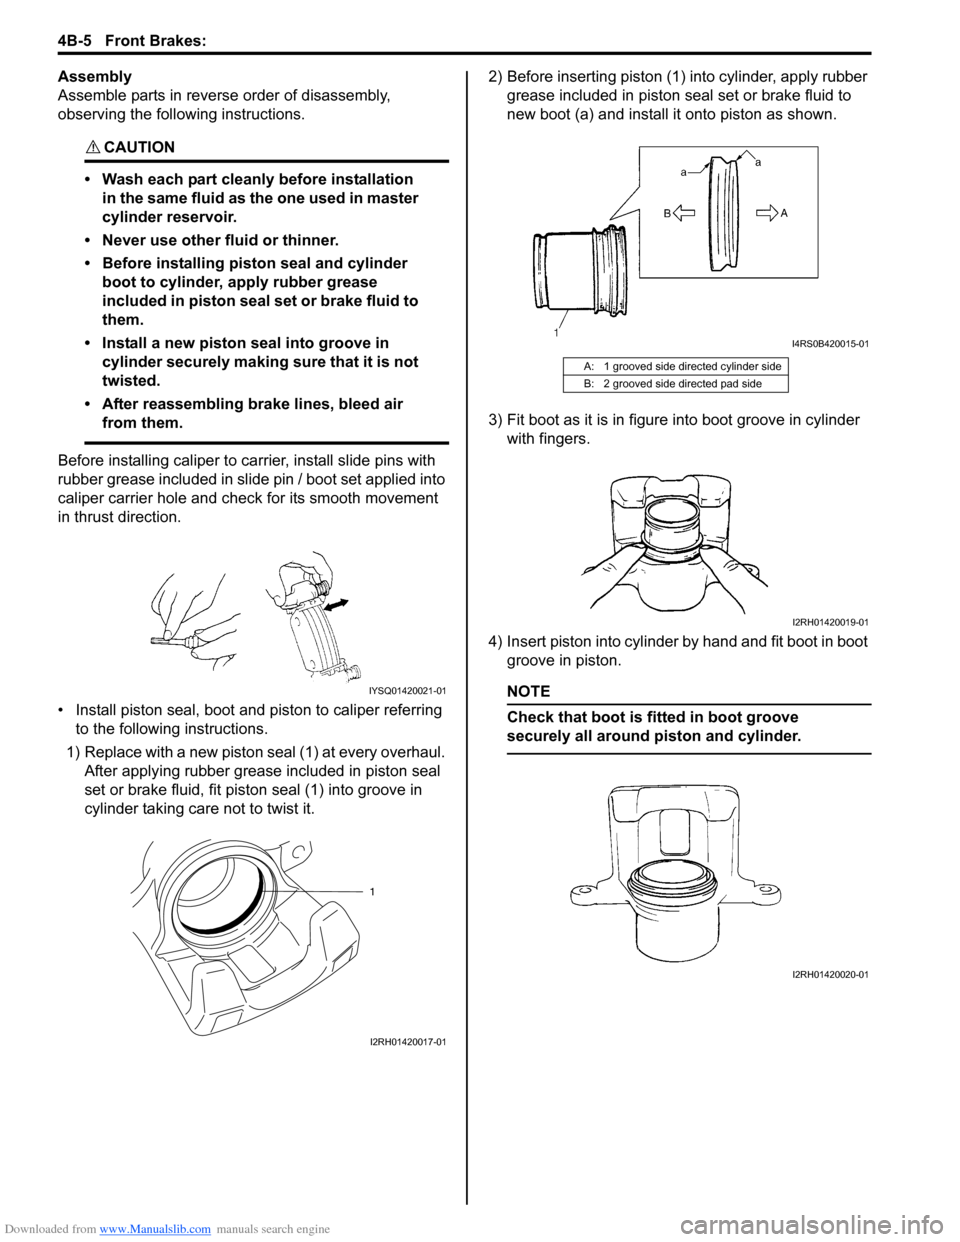 SUZUKI SX4 2006 1.G Service User Guide Downloaded from www.Manualslib.com manuals search engine 4B-5 Front Brakes: 
Assembly
Assemble parts in reverse order of disassembly, 
observing the following instructions.
CAUTION! 
• Wash each par